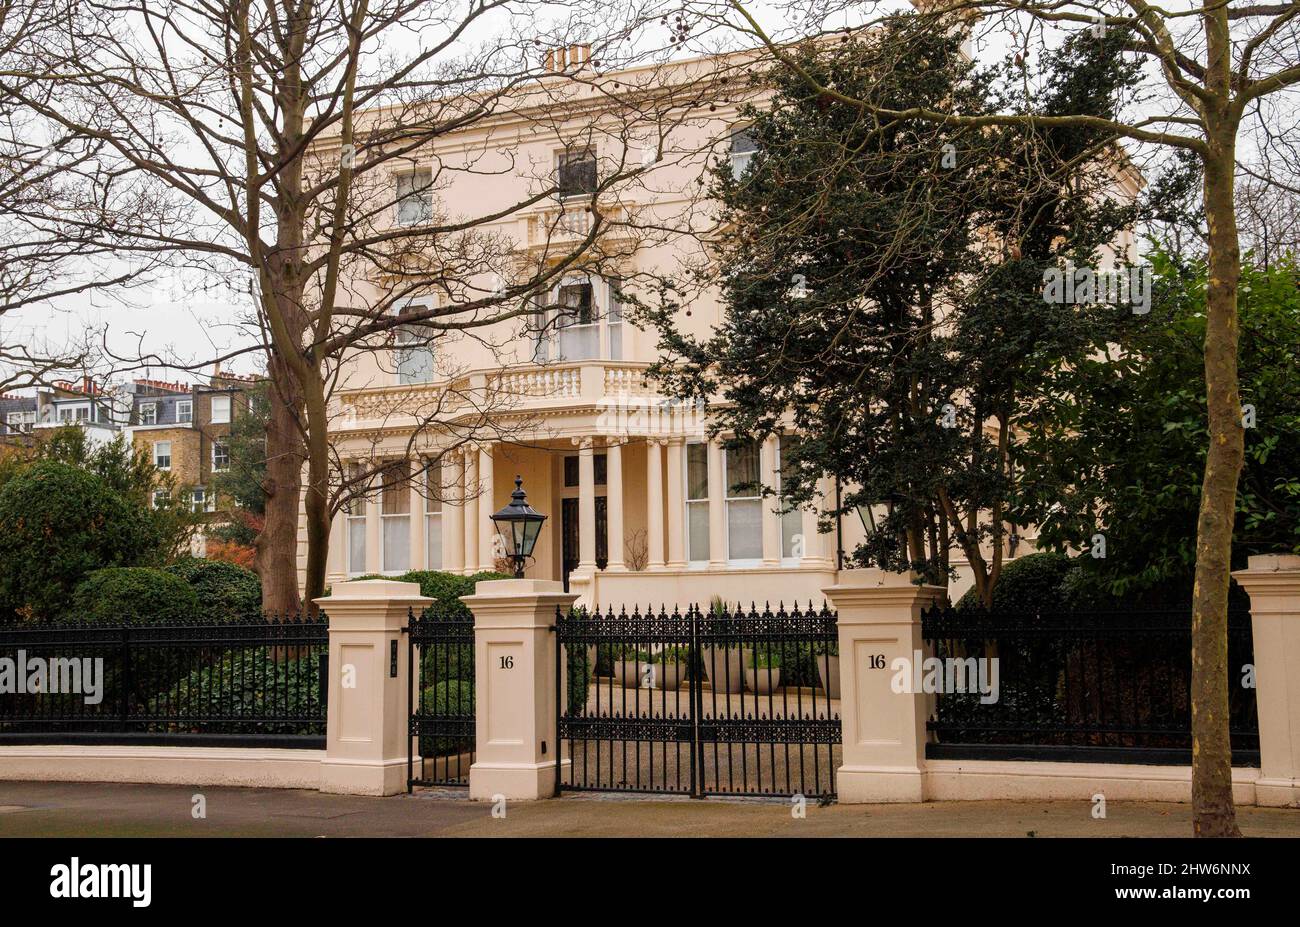 London, UK 4 Mar 2022 Roman Abramovich's 15 bedroom House in Kensington which he bought for £90 Million in 2009. This is one of many assets that the Billionaire will probably be selling. He has already stated that he is selling Chelsea Football Club. Roman Abramovich is selling off his £200m London property portfolio within days to avoid having his assets frozen in case he is sanctioned by Britain, it was reported last night. Credit: Mark Thomas/Alamy Live News Stock Photo